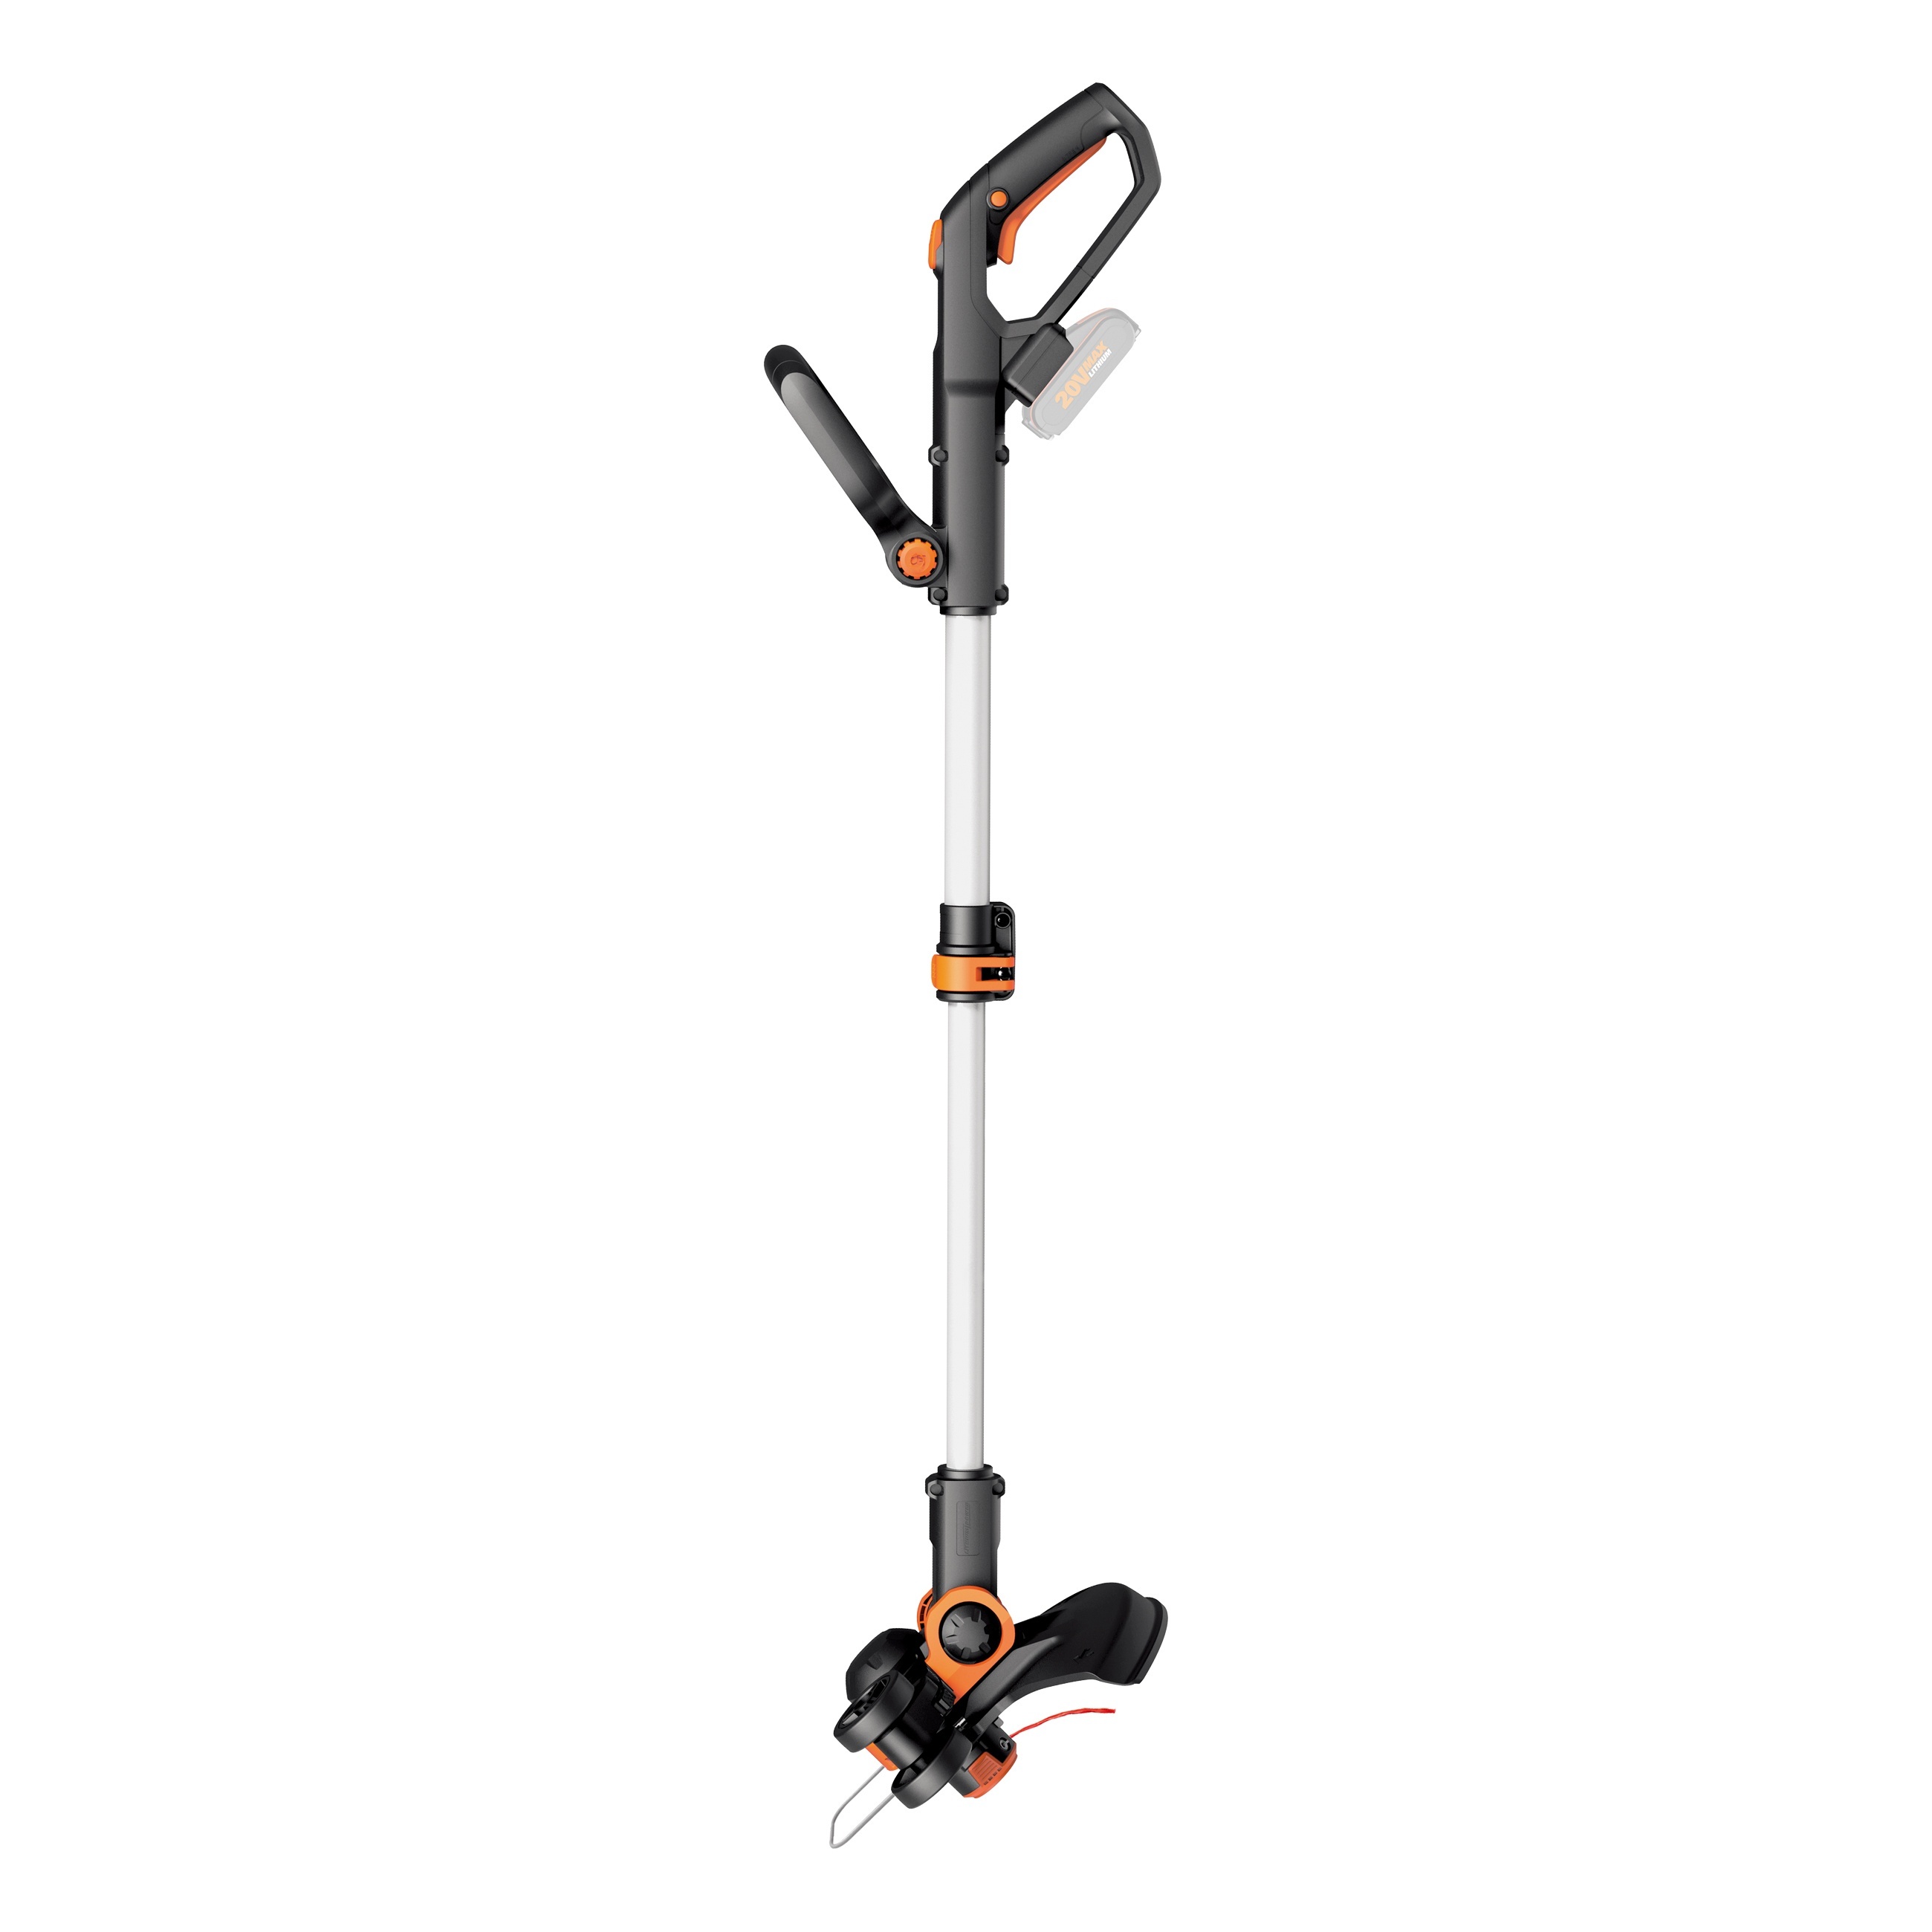 WORX WG163E.9 CORDLESS GRASS TRIMMER SOLO 20V POWER SHARE GT 3.0 WITH WHEELED EDGER